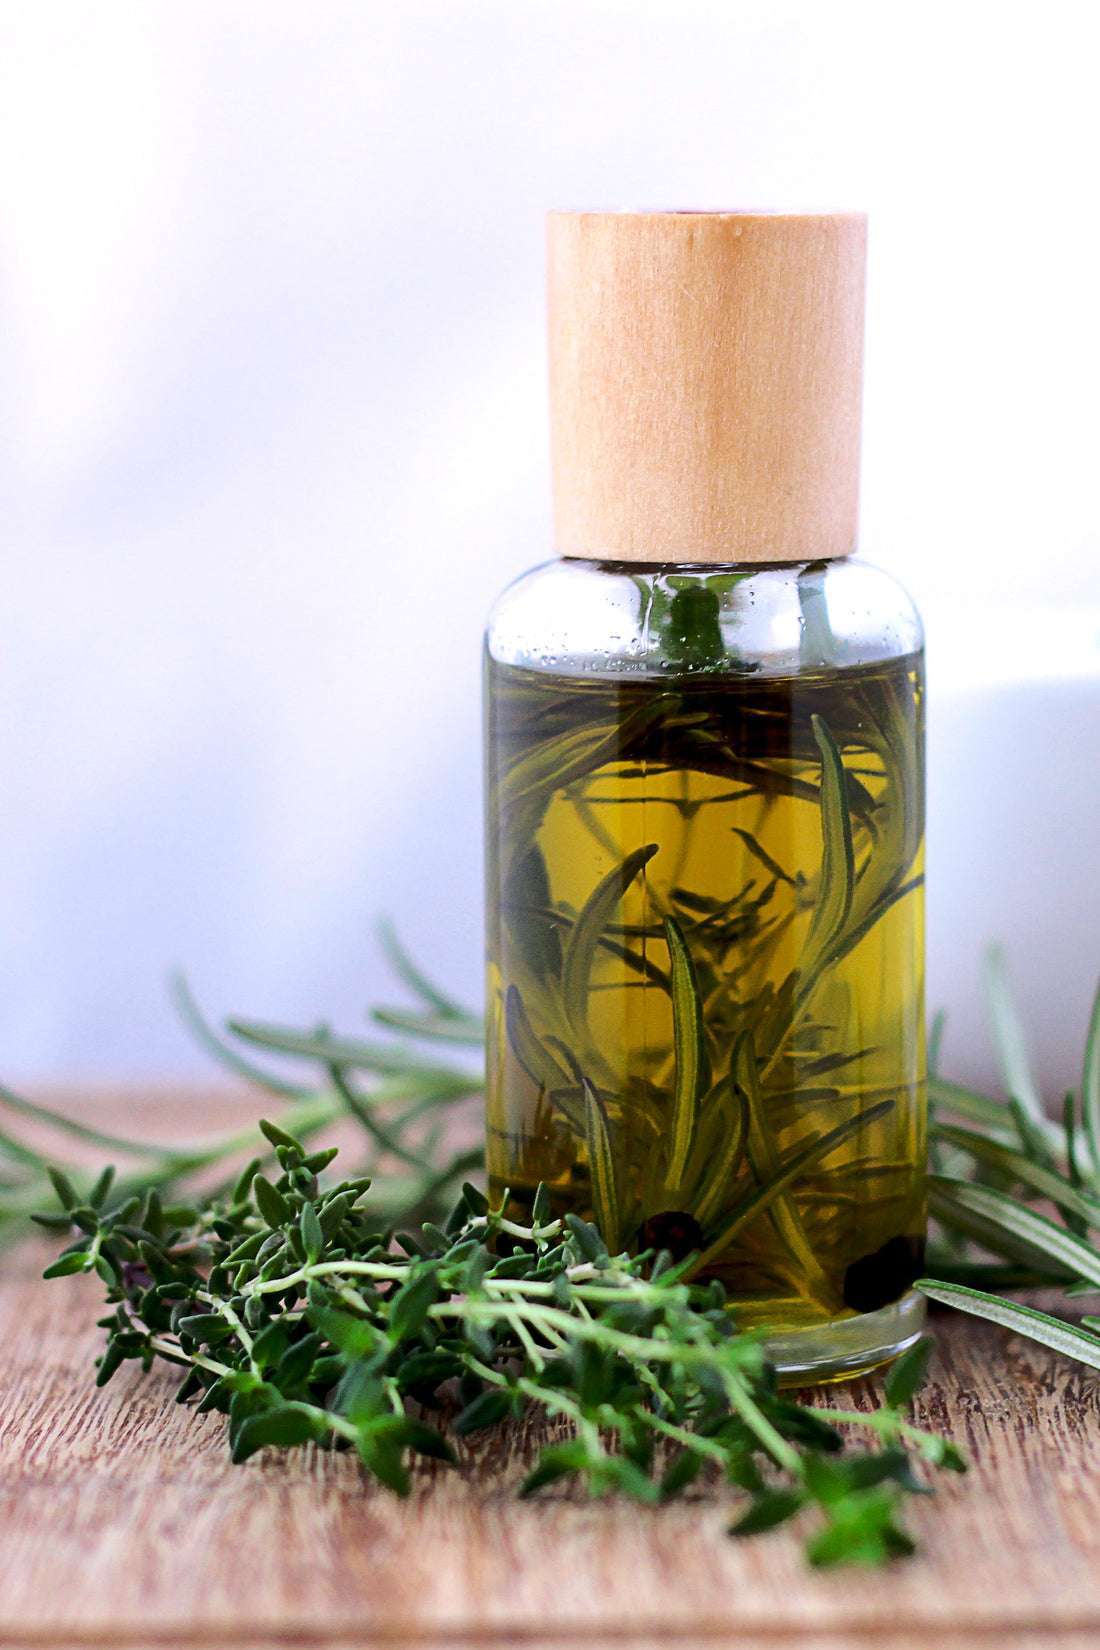 Herb Infused Oils vs Essential Oils – What’s the Difference?